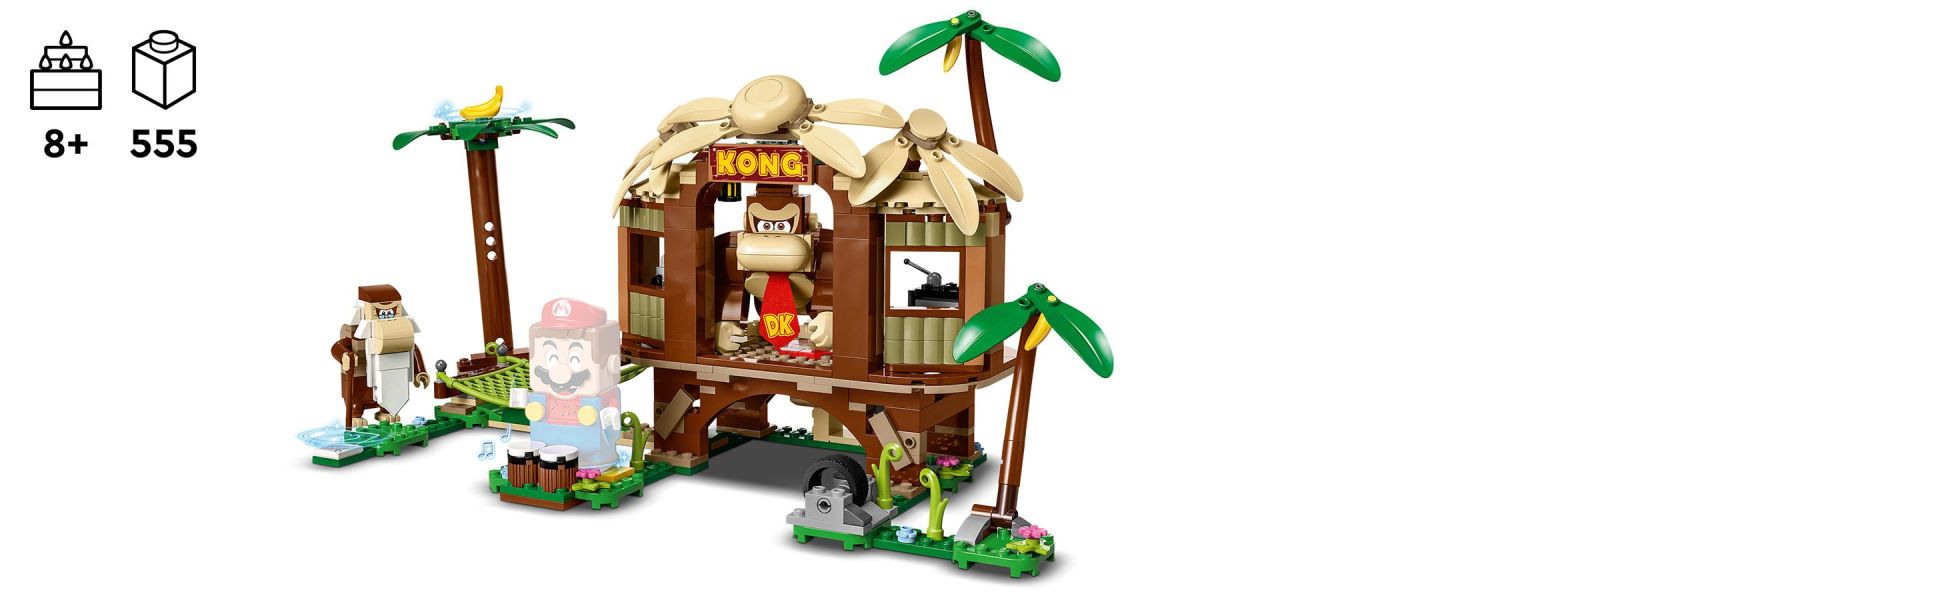 LEGO Super Mario Donkey Kong's Tree House Expansion Set, Buildable Mario  Day Toy with 2 Collectible Super Mario Toy Figures, Donkey Kong and Cranky  Kong, Fun Video Game Toy for Kids Ages